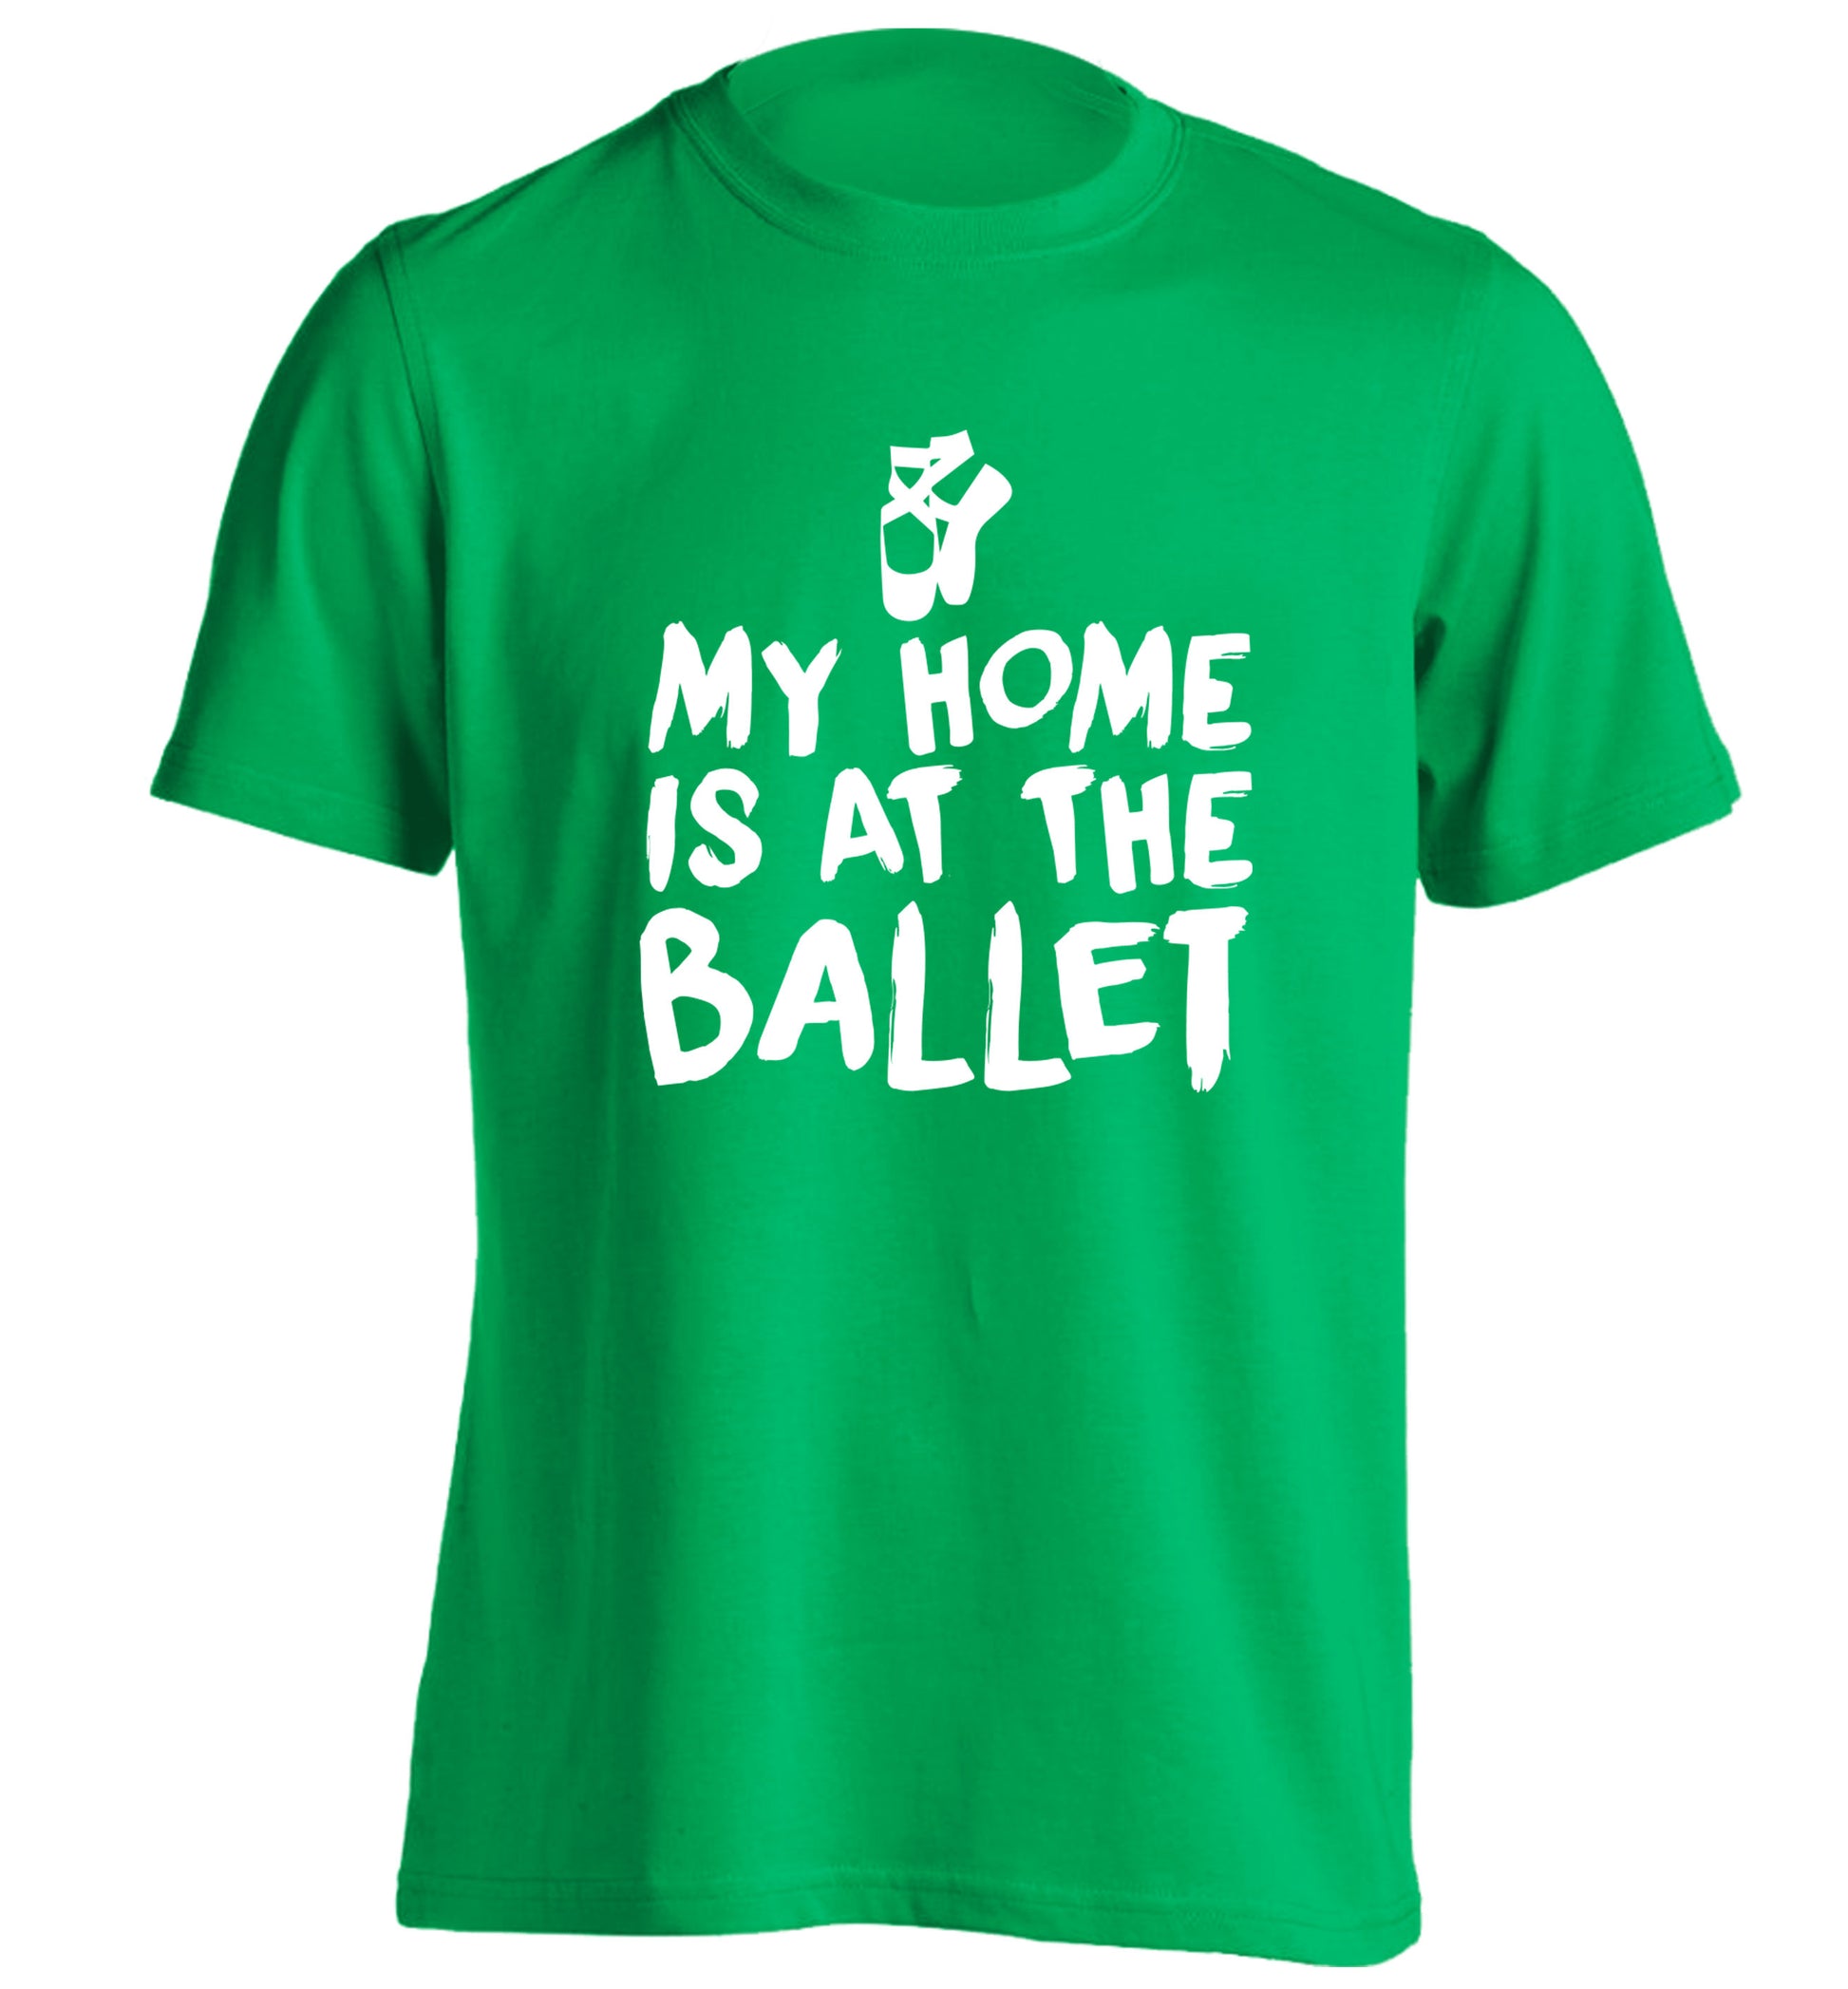 My home is at the dance studio adults unisex green Tshirt 2XL